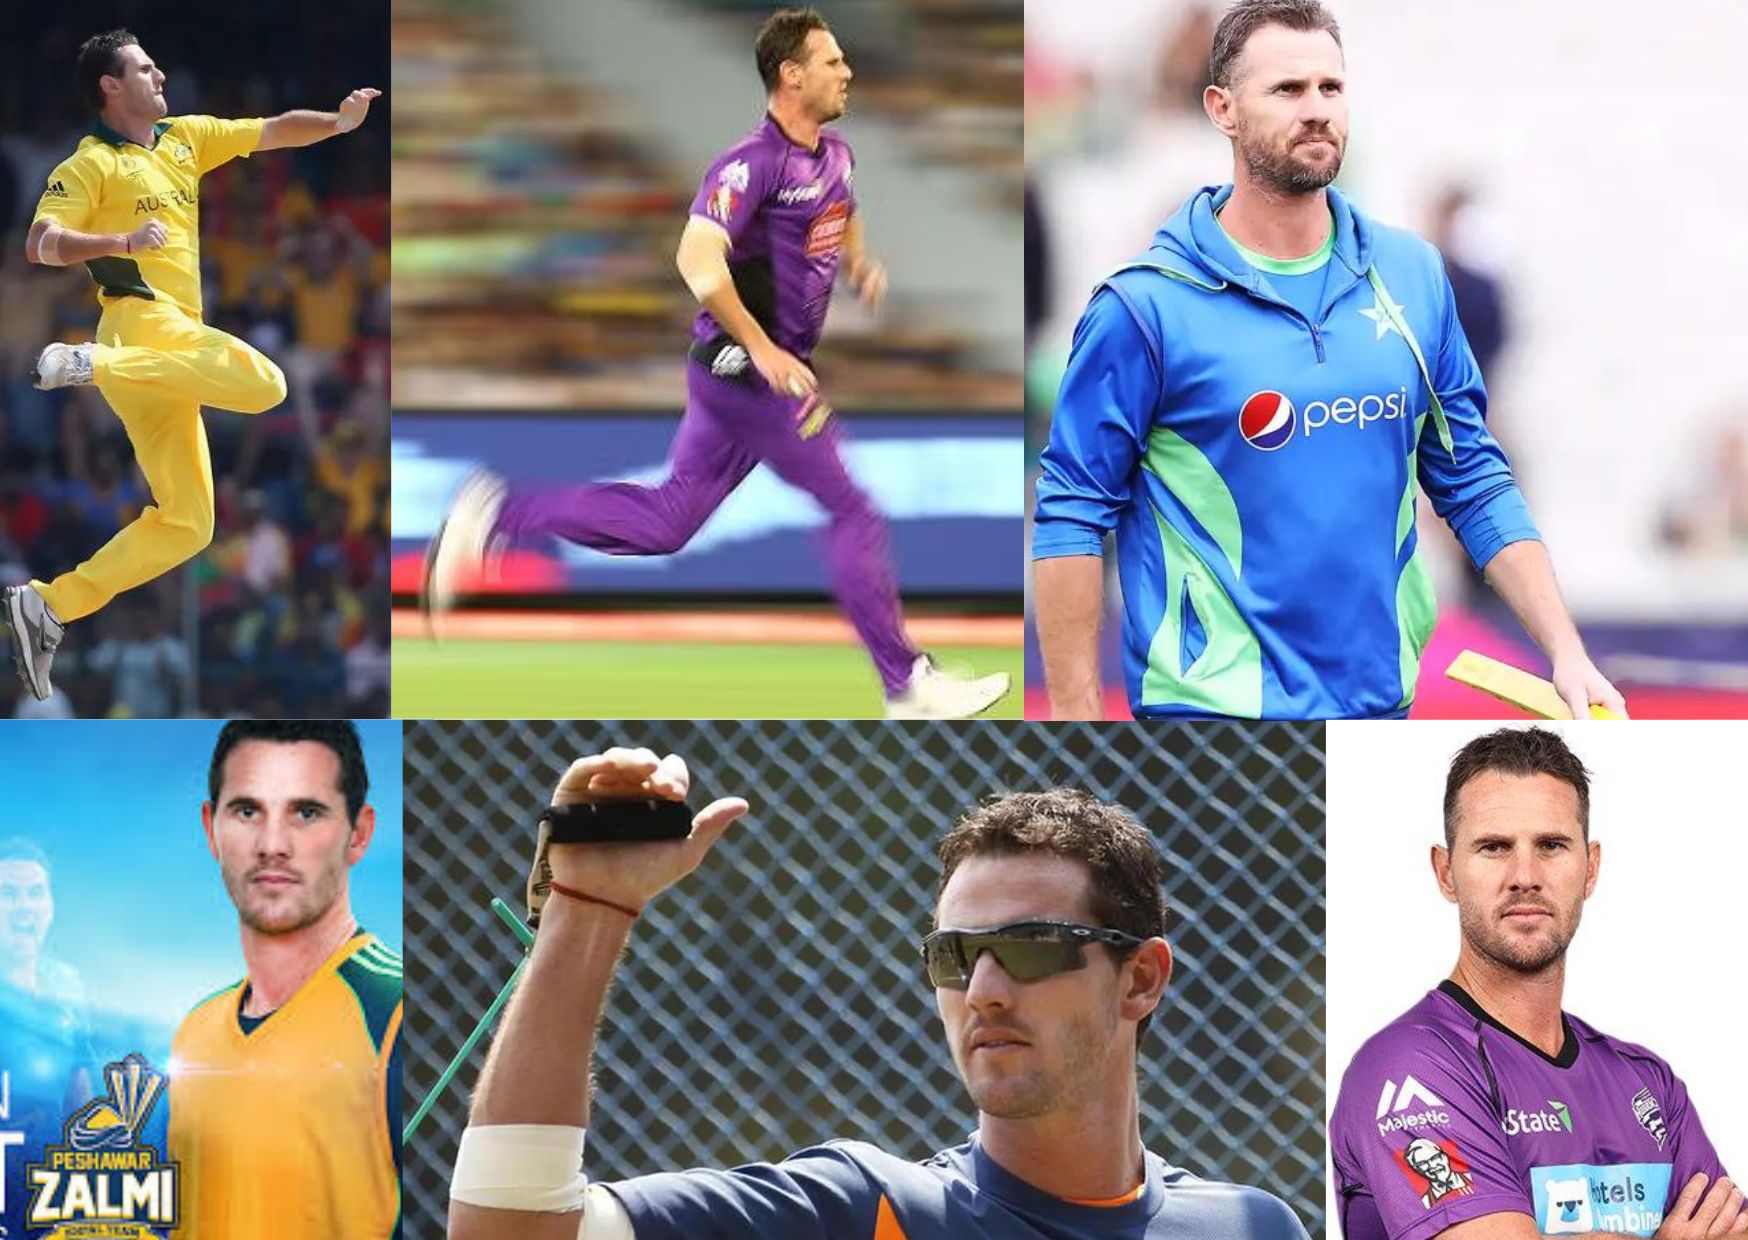 Top 10 Most Successful Fast Bowler In The World